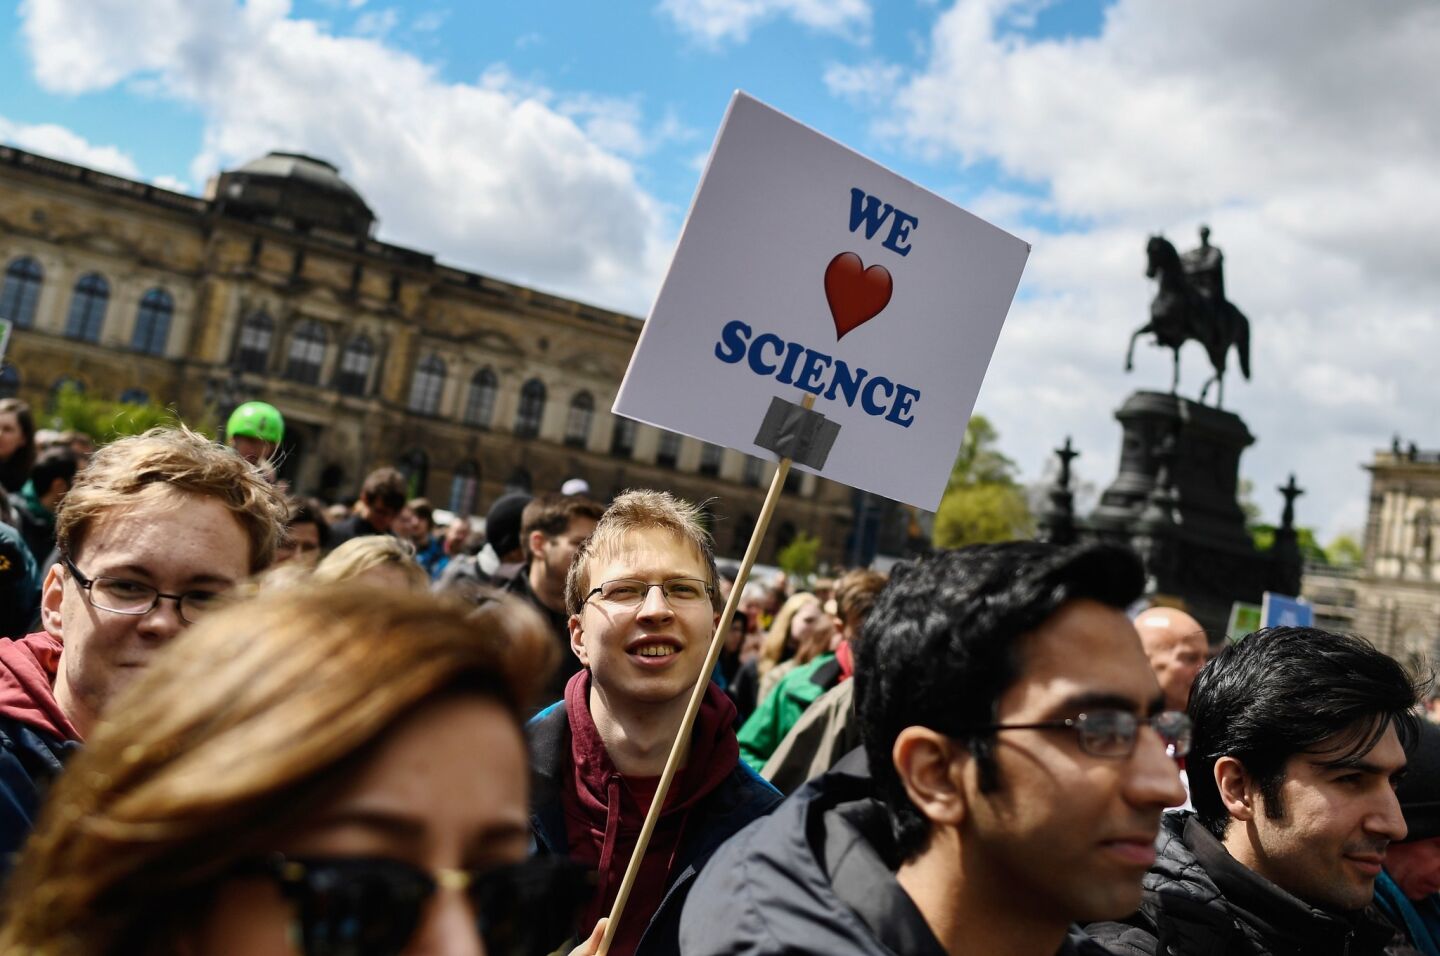 March for Science participants fill Theater Square in Dresden, Germany.